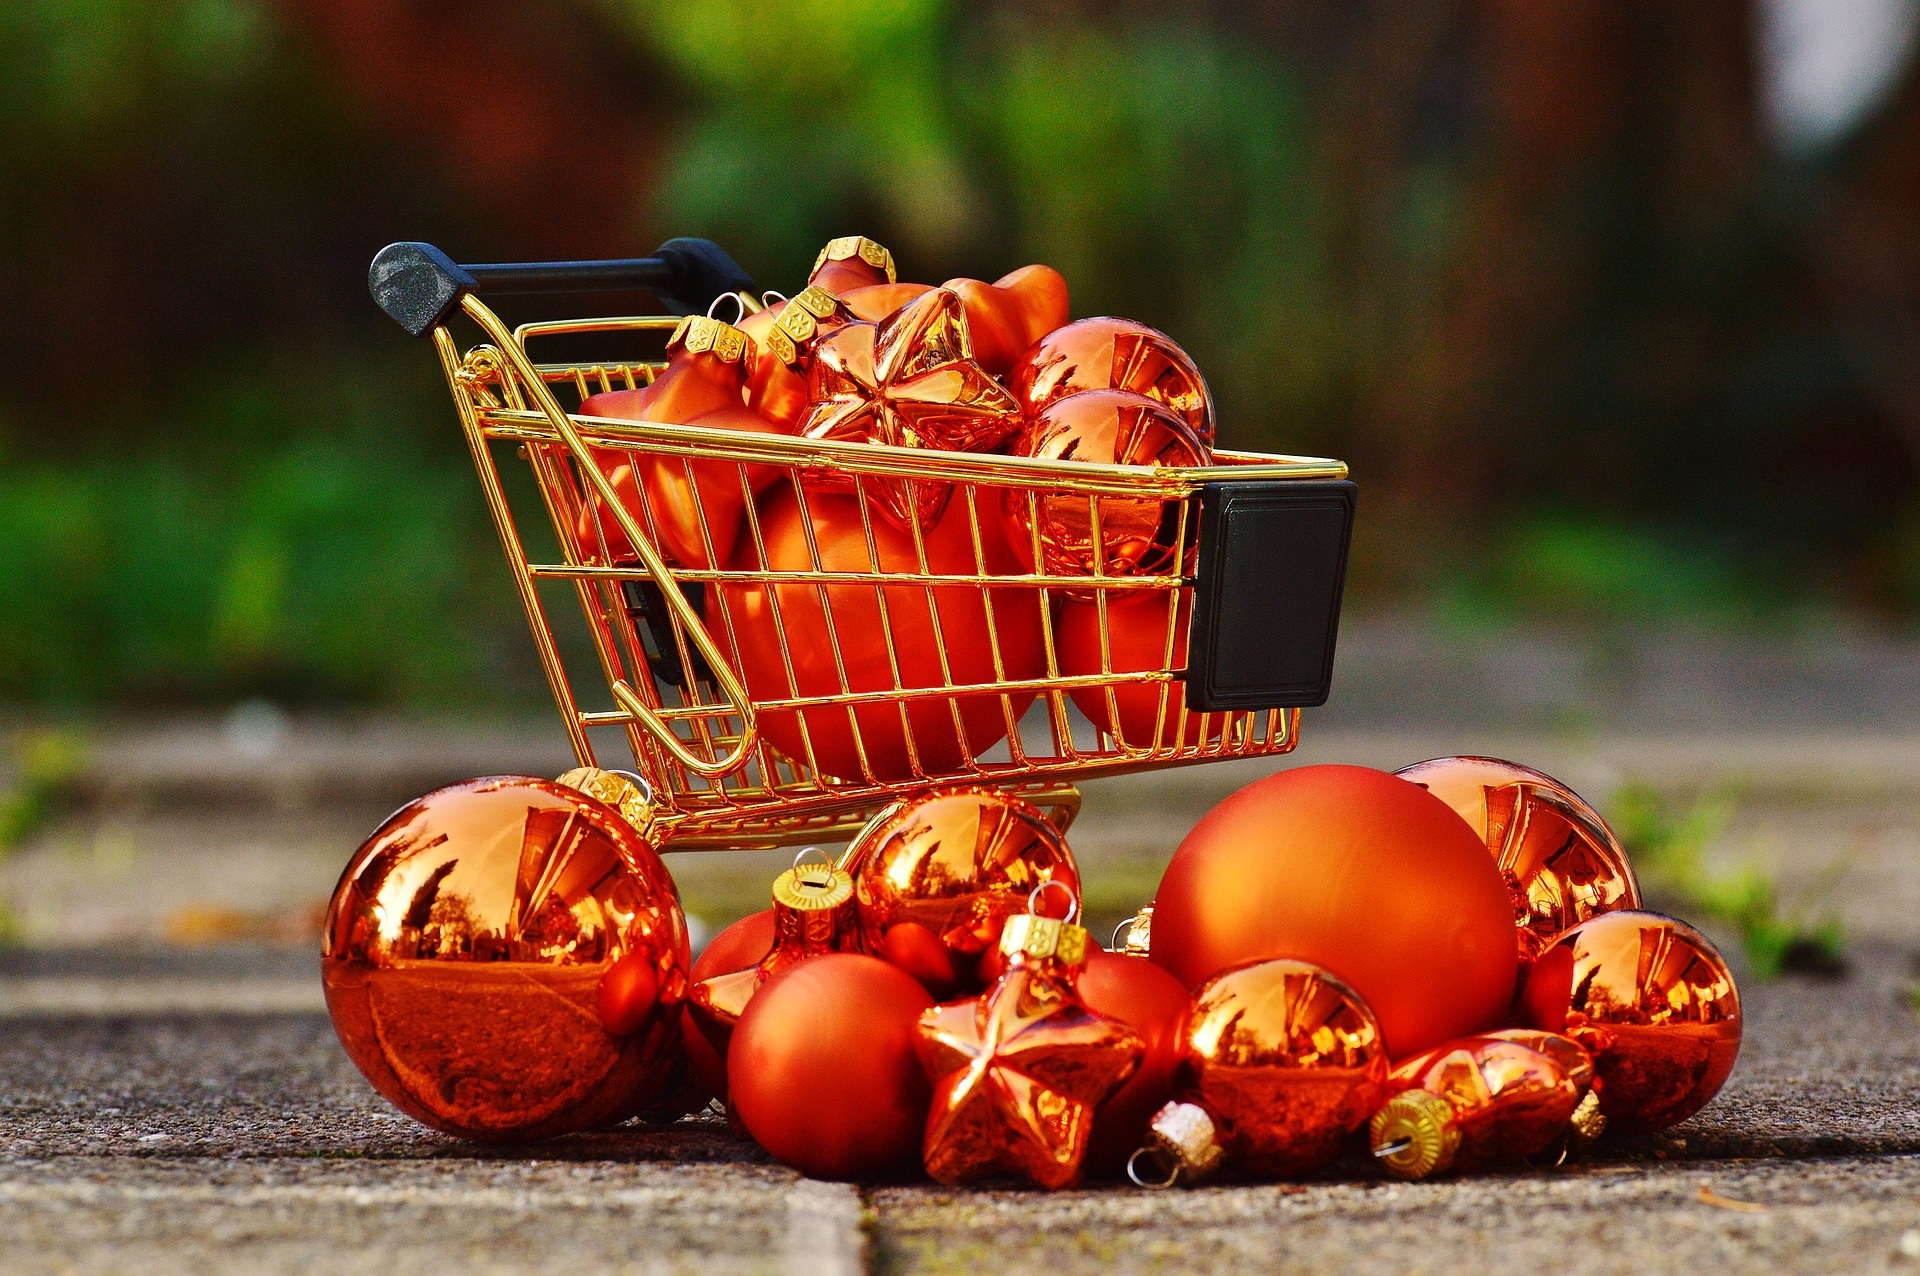 shopping cart full of shiny red ornaments